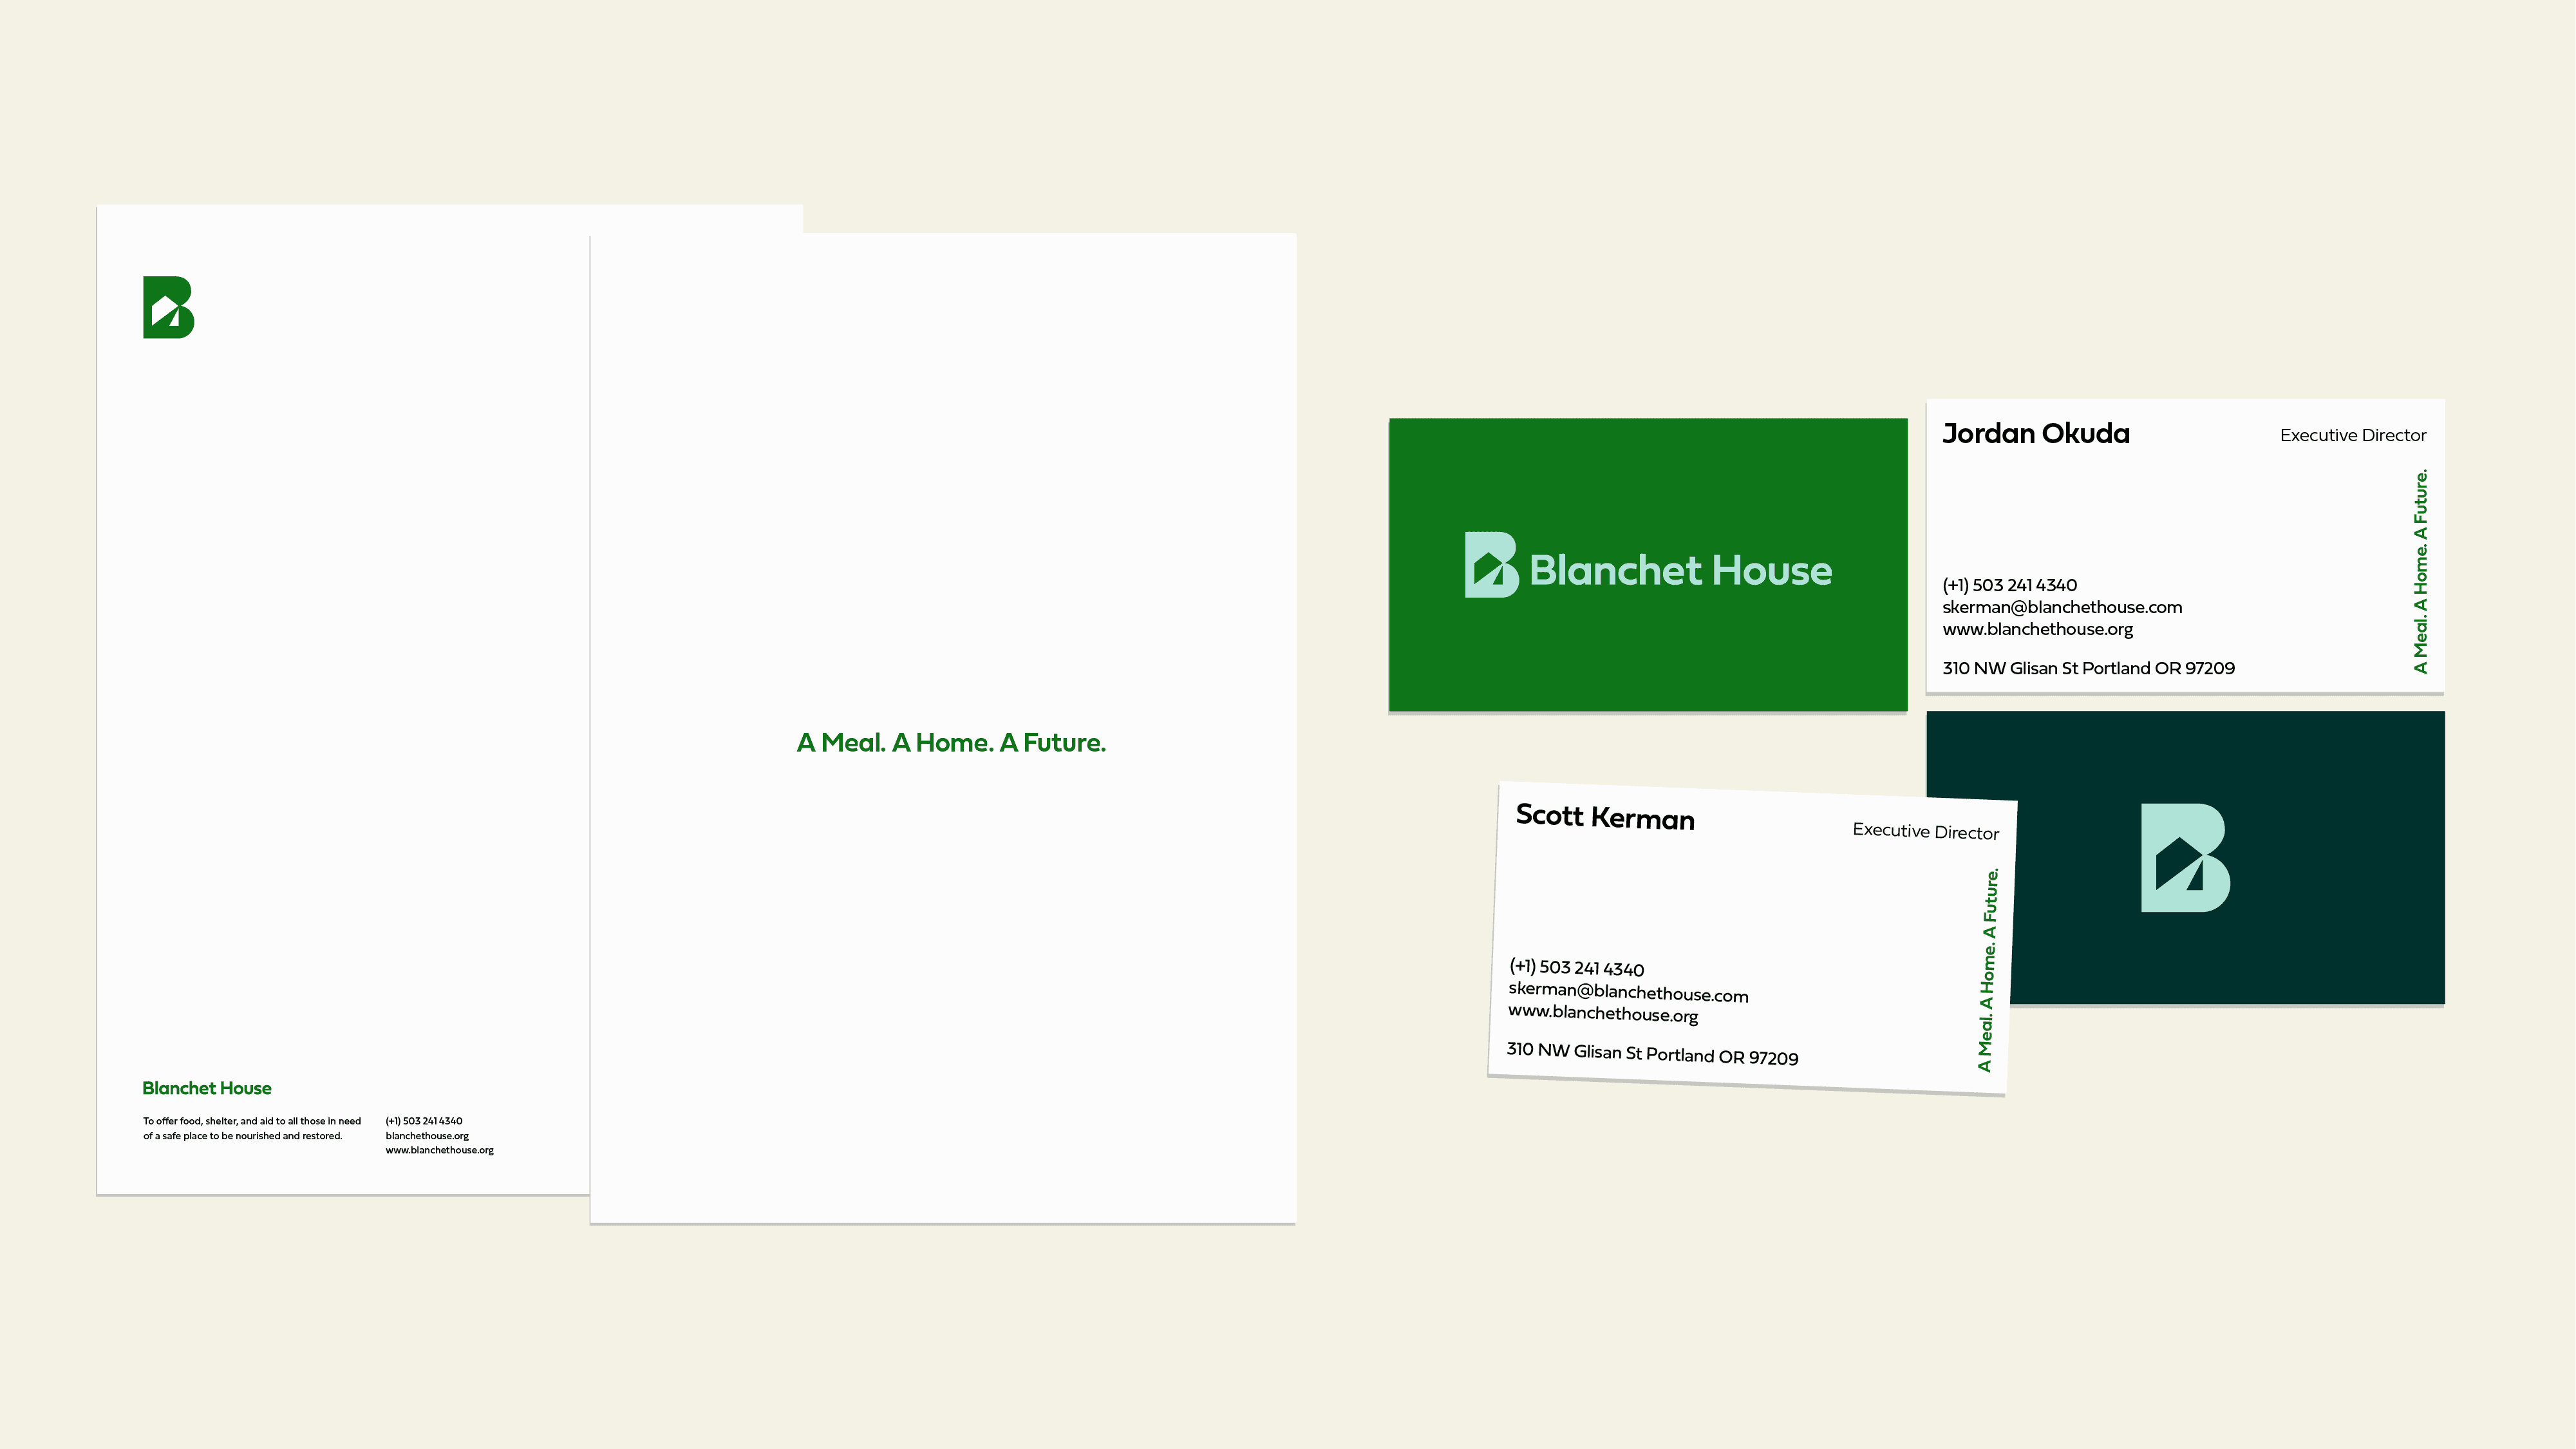 Blanchet House Letterhead, and business card layouts